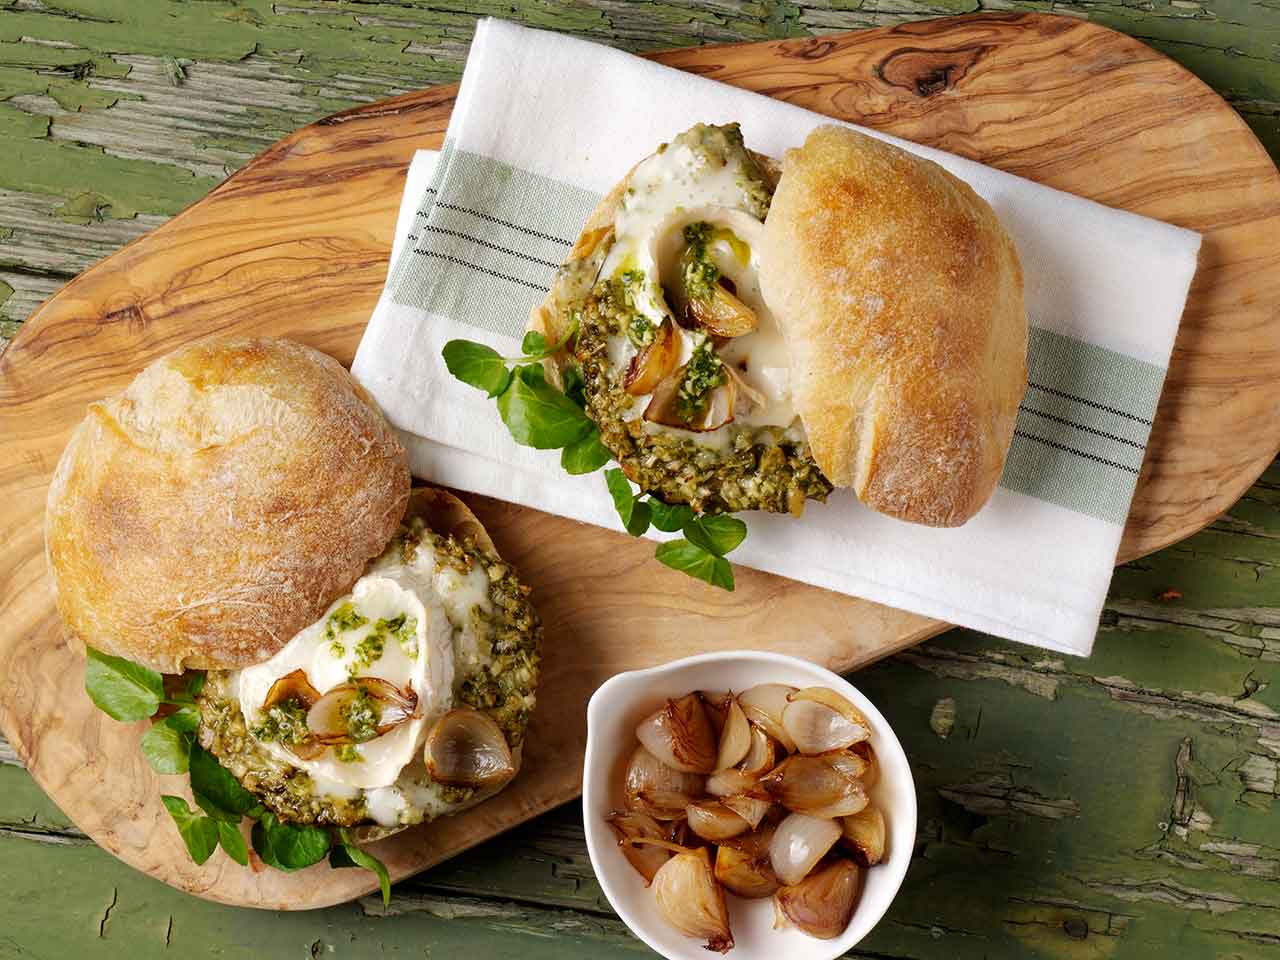 Pesto and goat’s cheese mushroom burgers with caramelised shallot topping